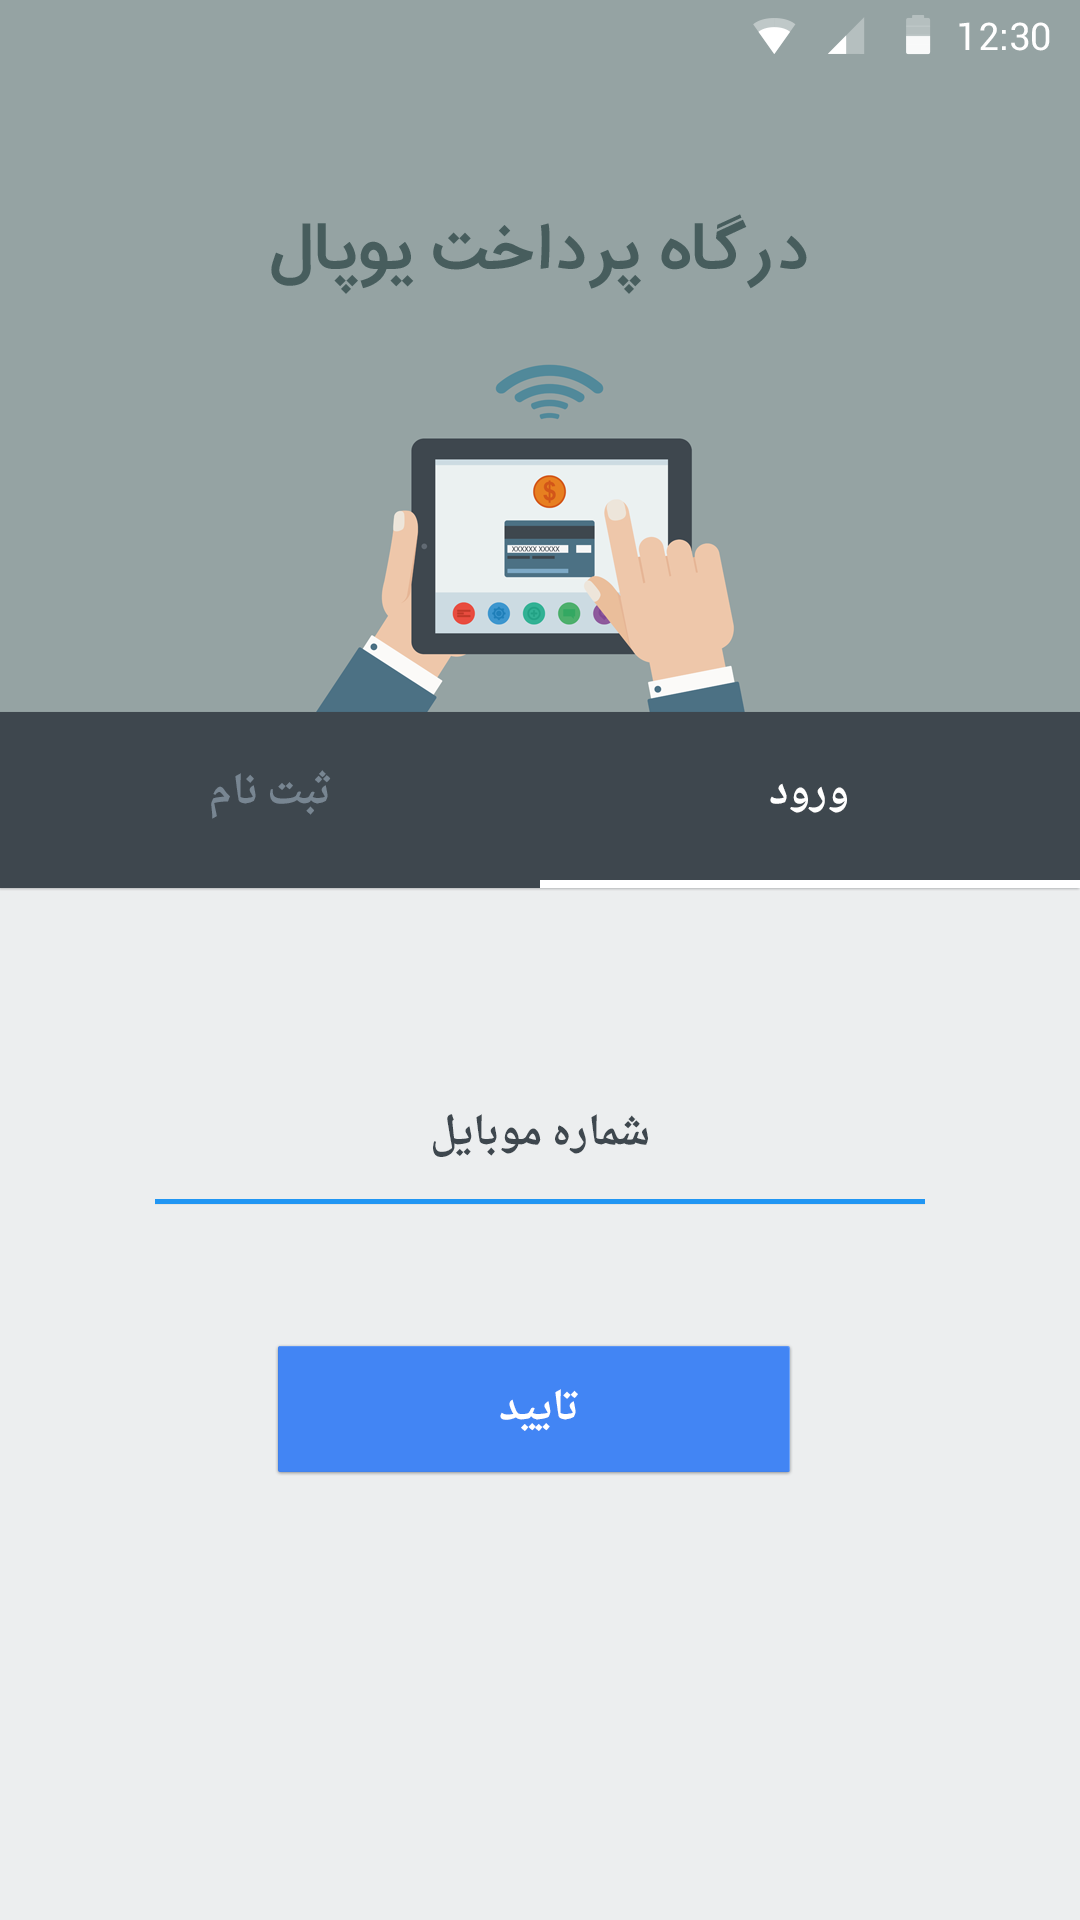 Upal for Android by Pouya Saadeghi - /projects/OAB6xa82ZCh54wthkRBoNWXbrTcBcwtu.png